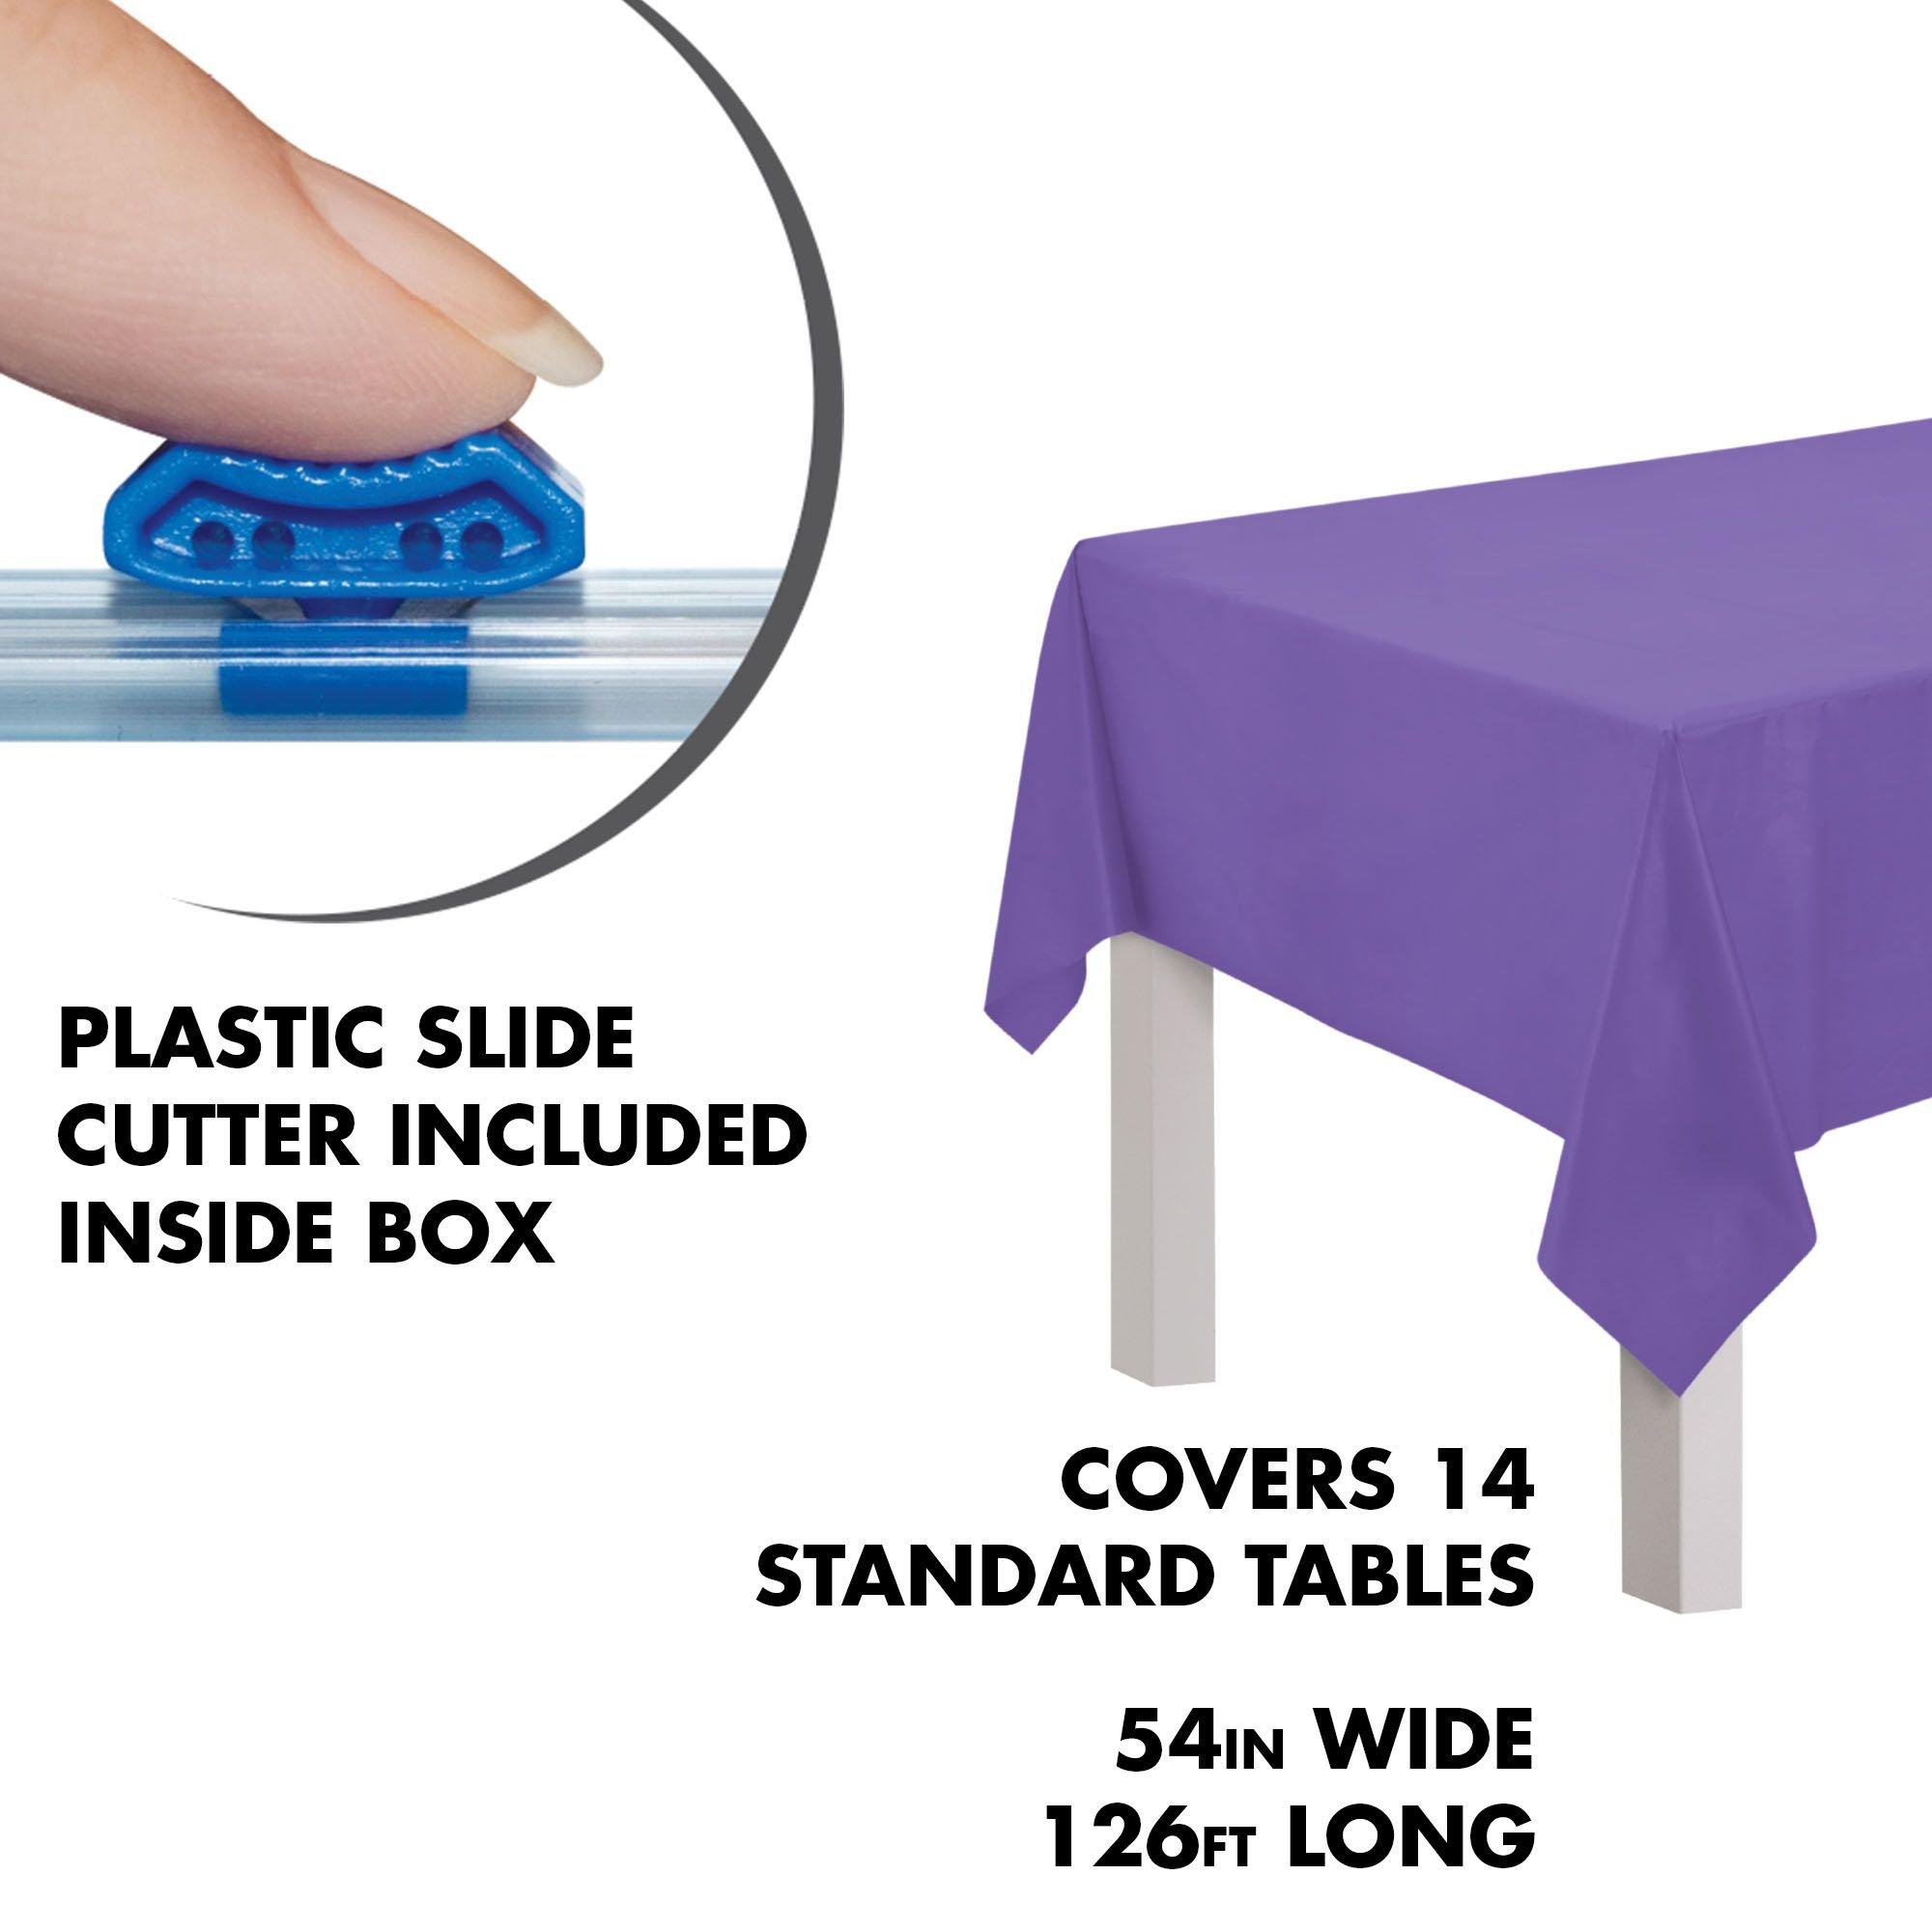 Exquisite Plastic Tablecloth Roll, Disposable Table Cover Roll, Covers 12 Tables